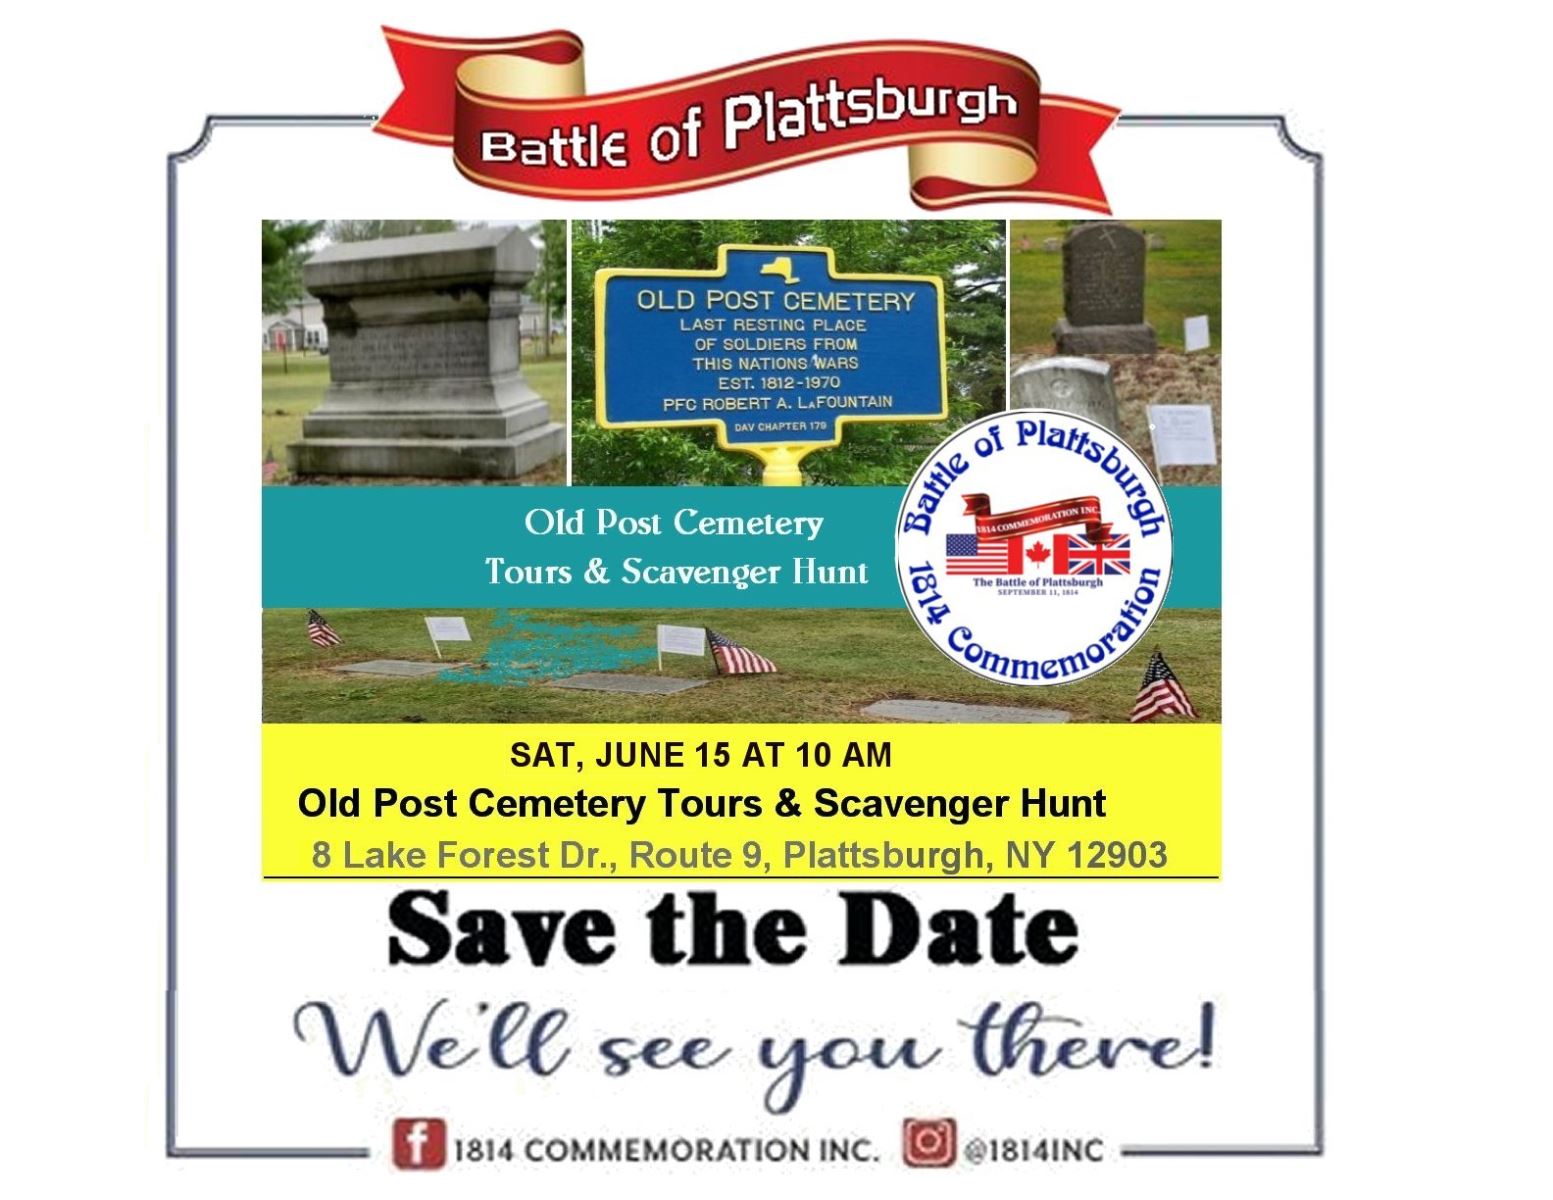 Old Post Cemetery Tours & Scavenger Hunt